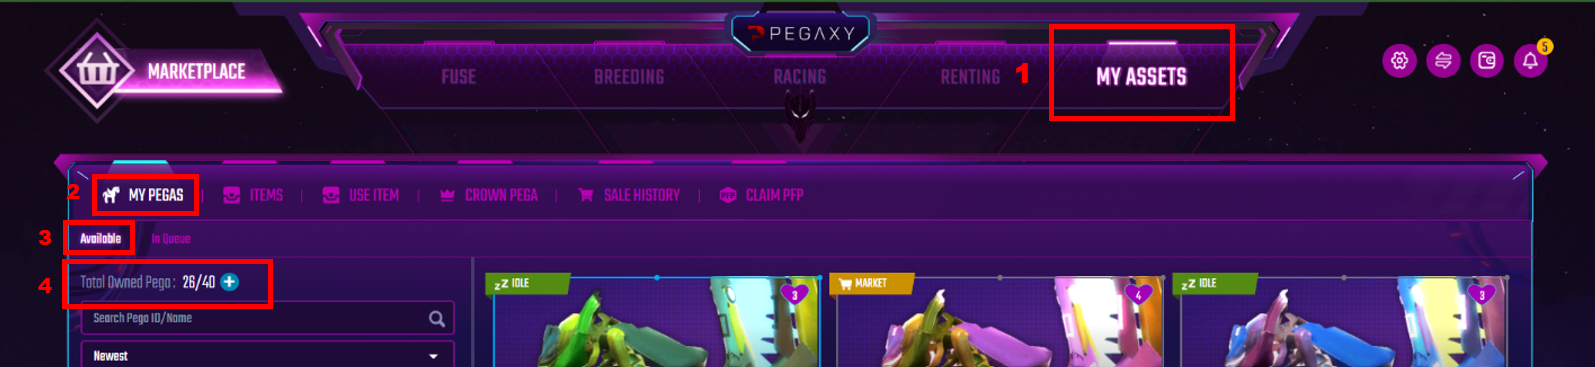 Pegaxy interface emphasizing My Assets, My Pegas, Available, and Total Owned Pega.